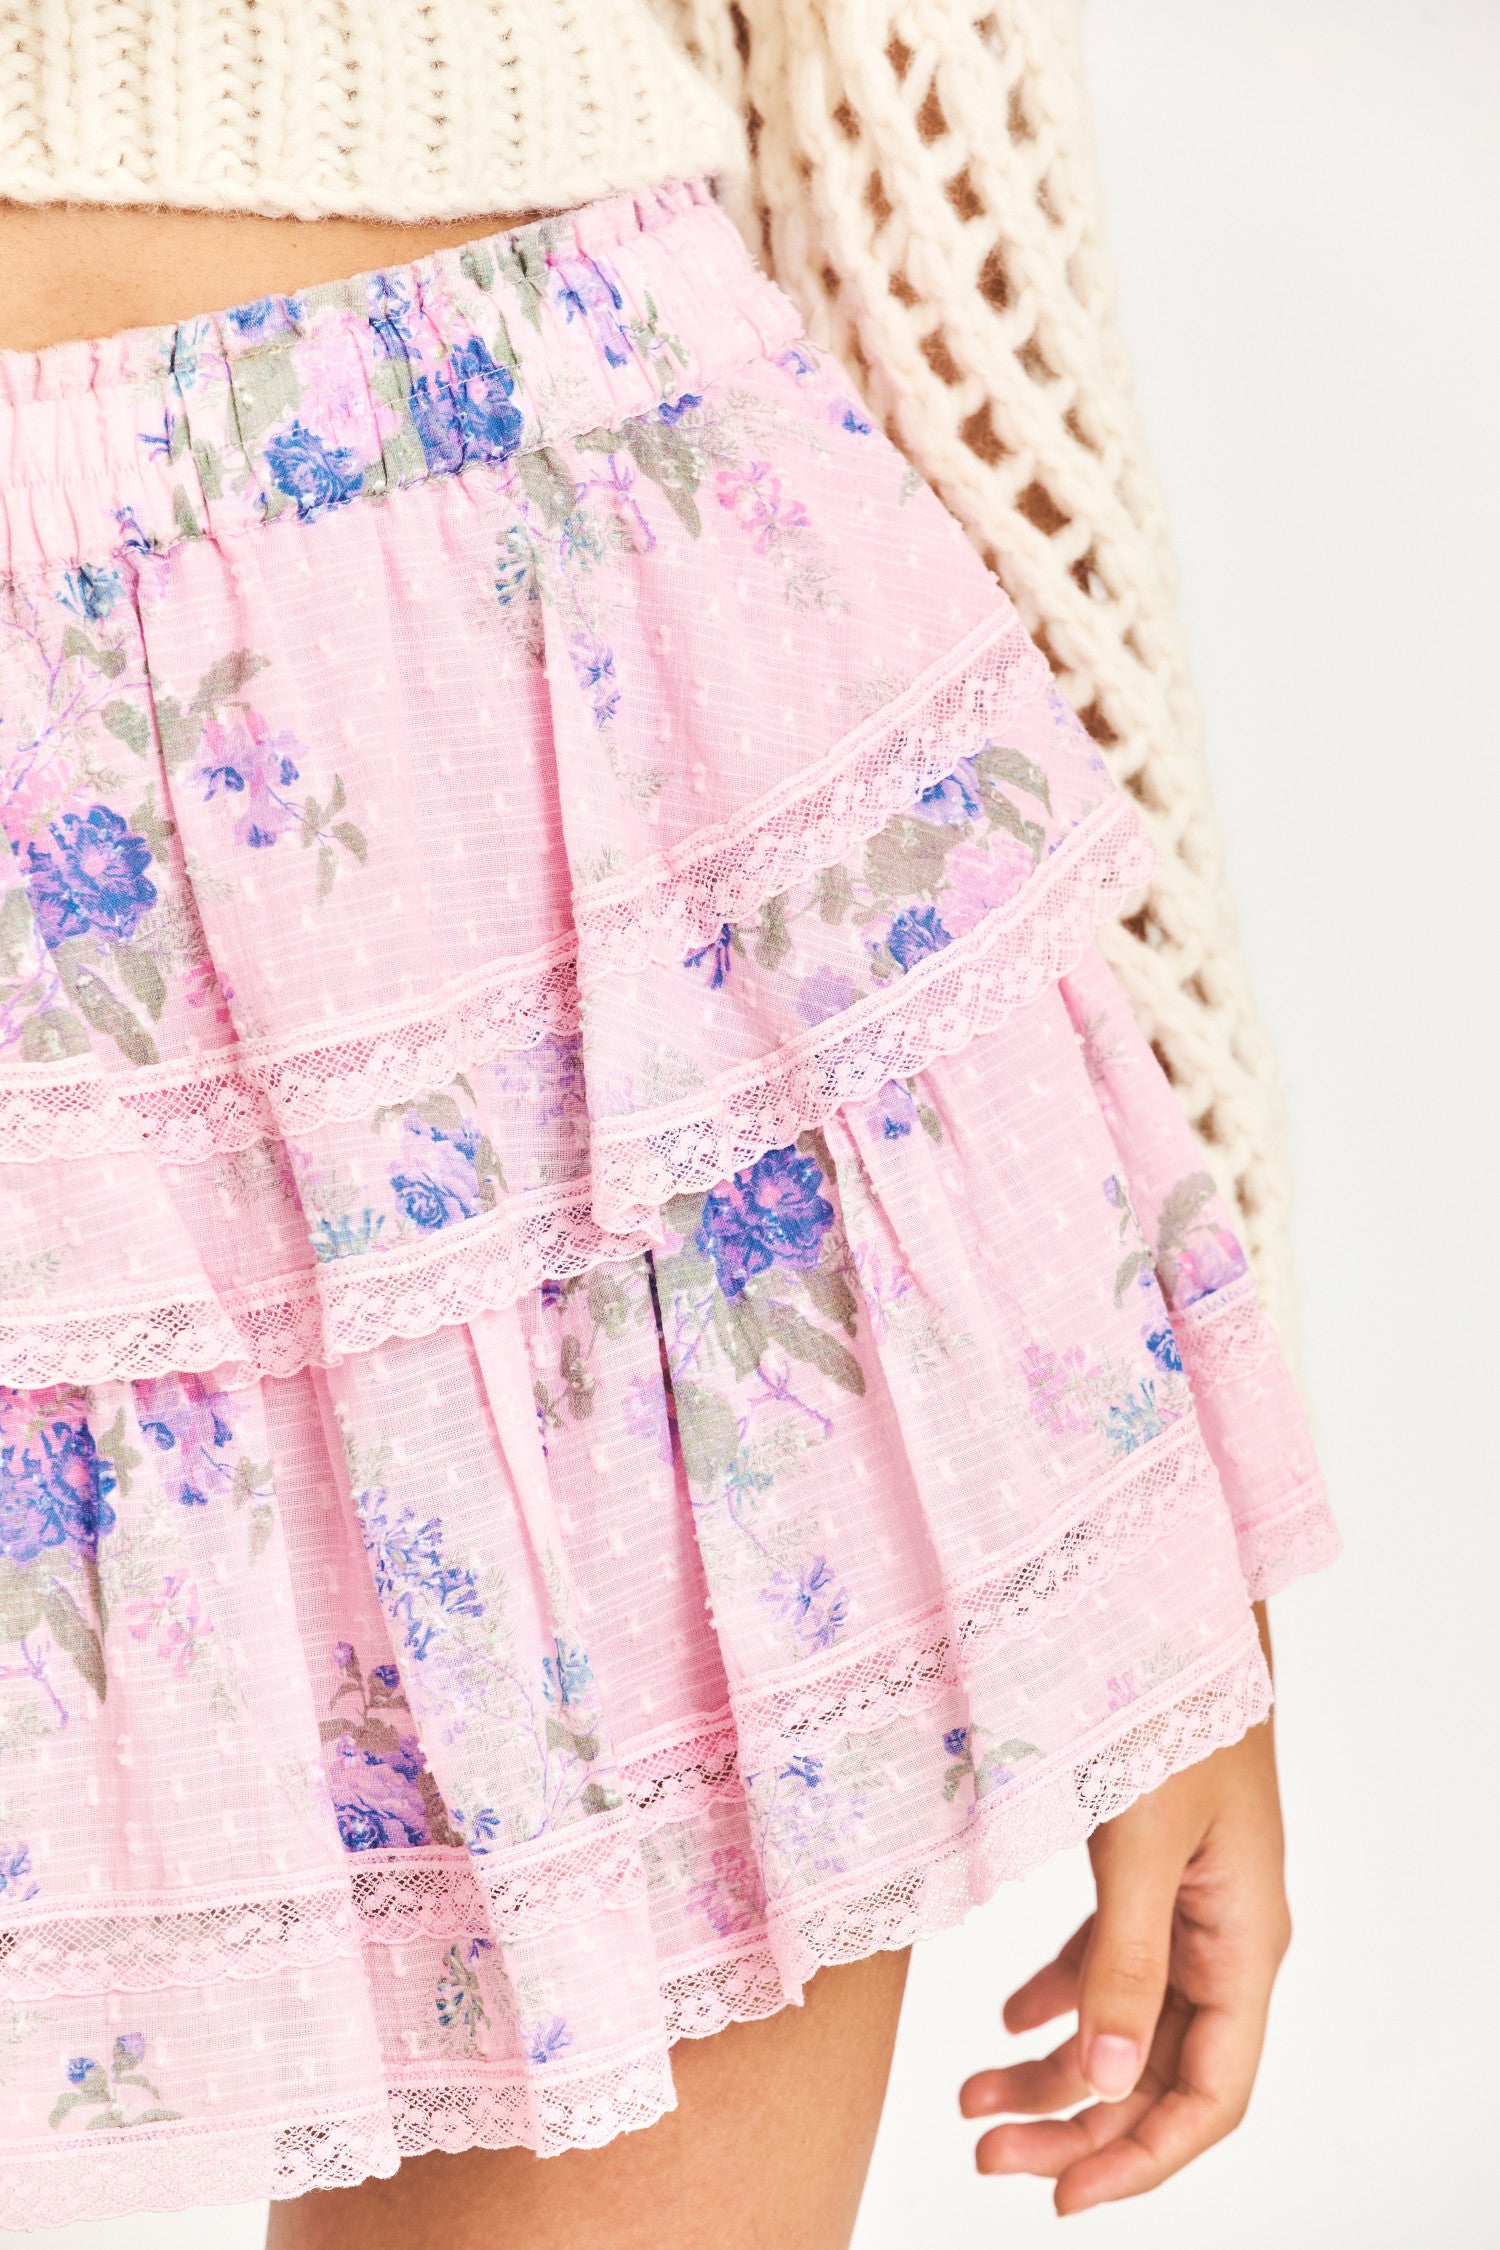  The Ruffle Mini skirt now comes with a soft pink color, blue heirloom bouquet print flowers, intricate inset lace trim, and all-over pin tuck details. It features an elastic waistband and tiered ruffles. 